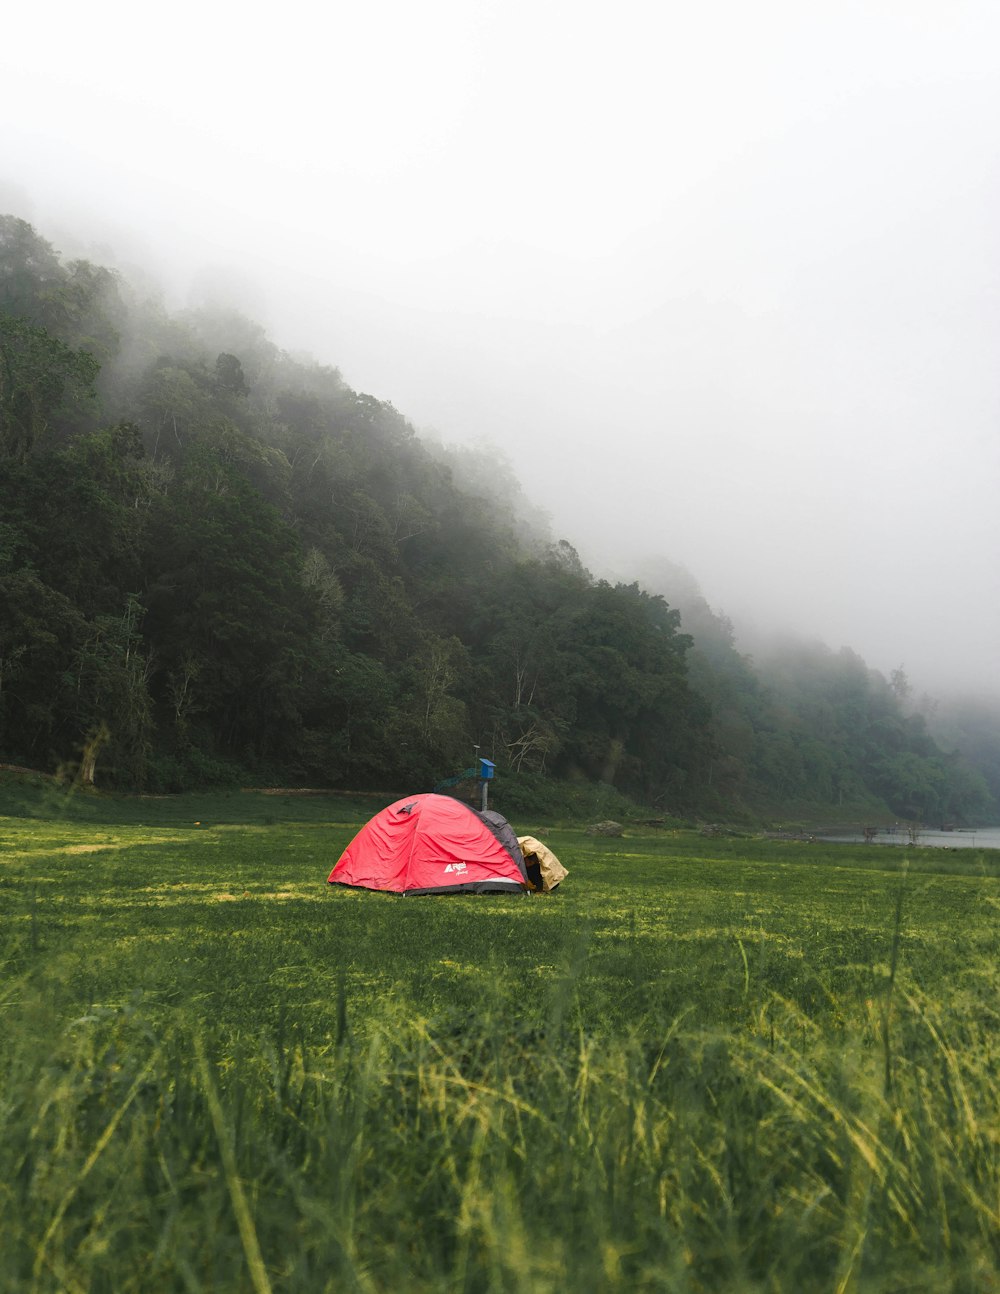 a person lying in a grassy field with a tent in the background